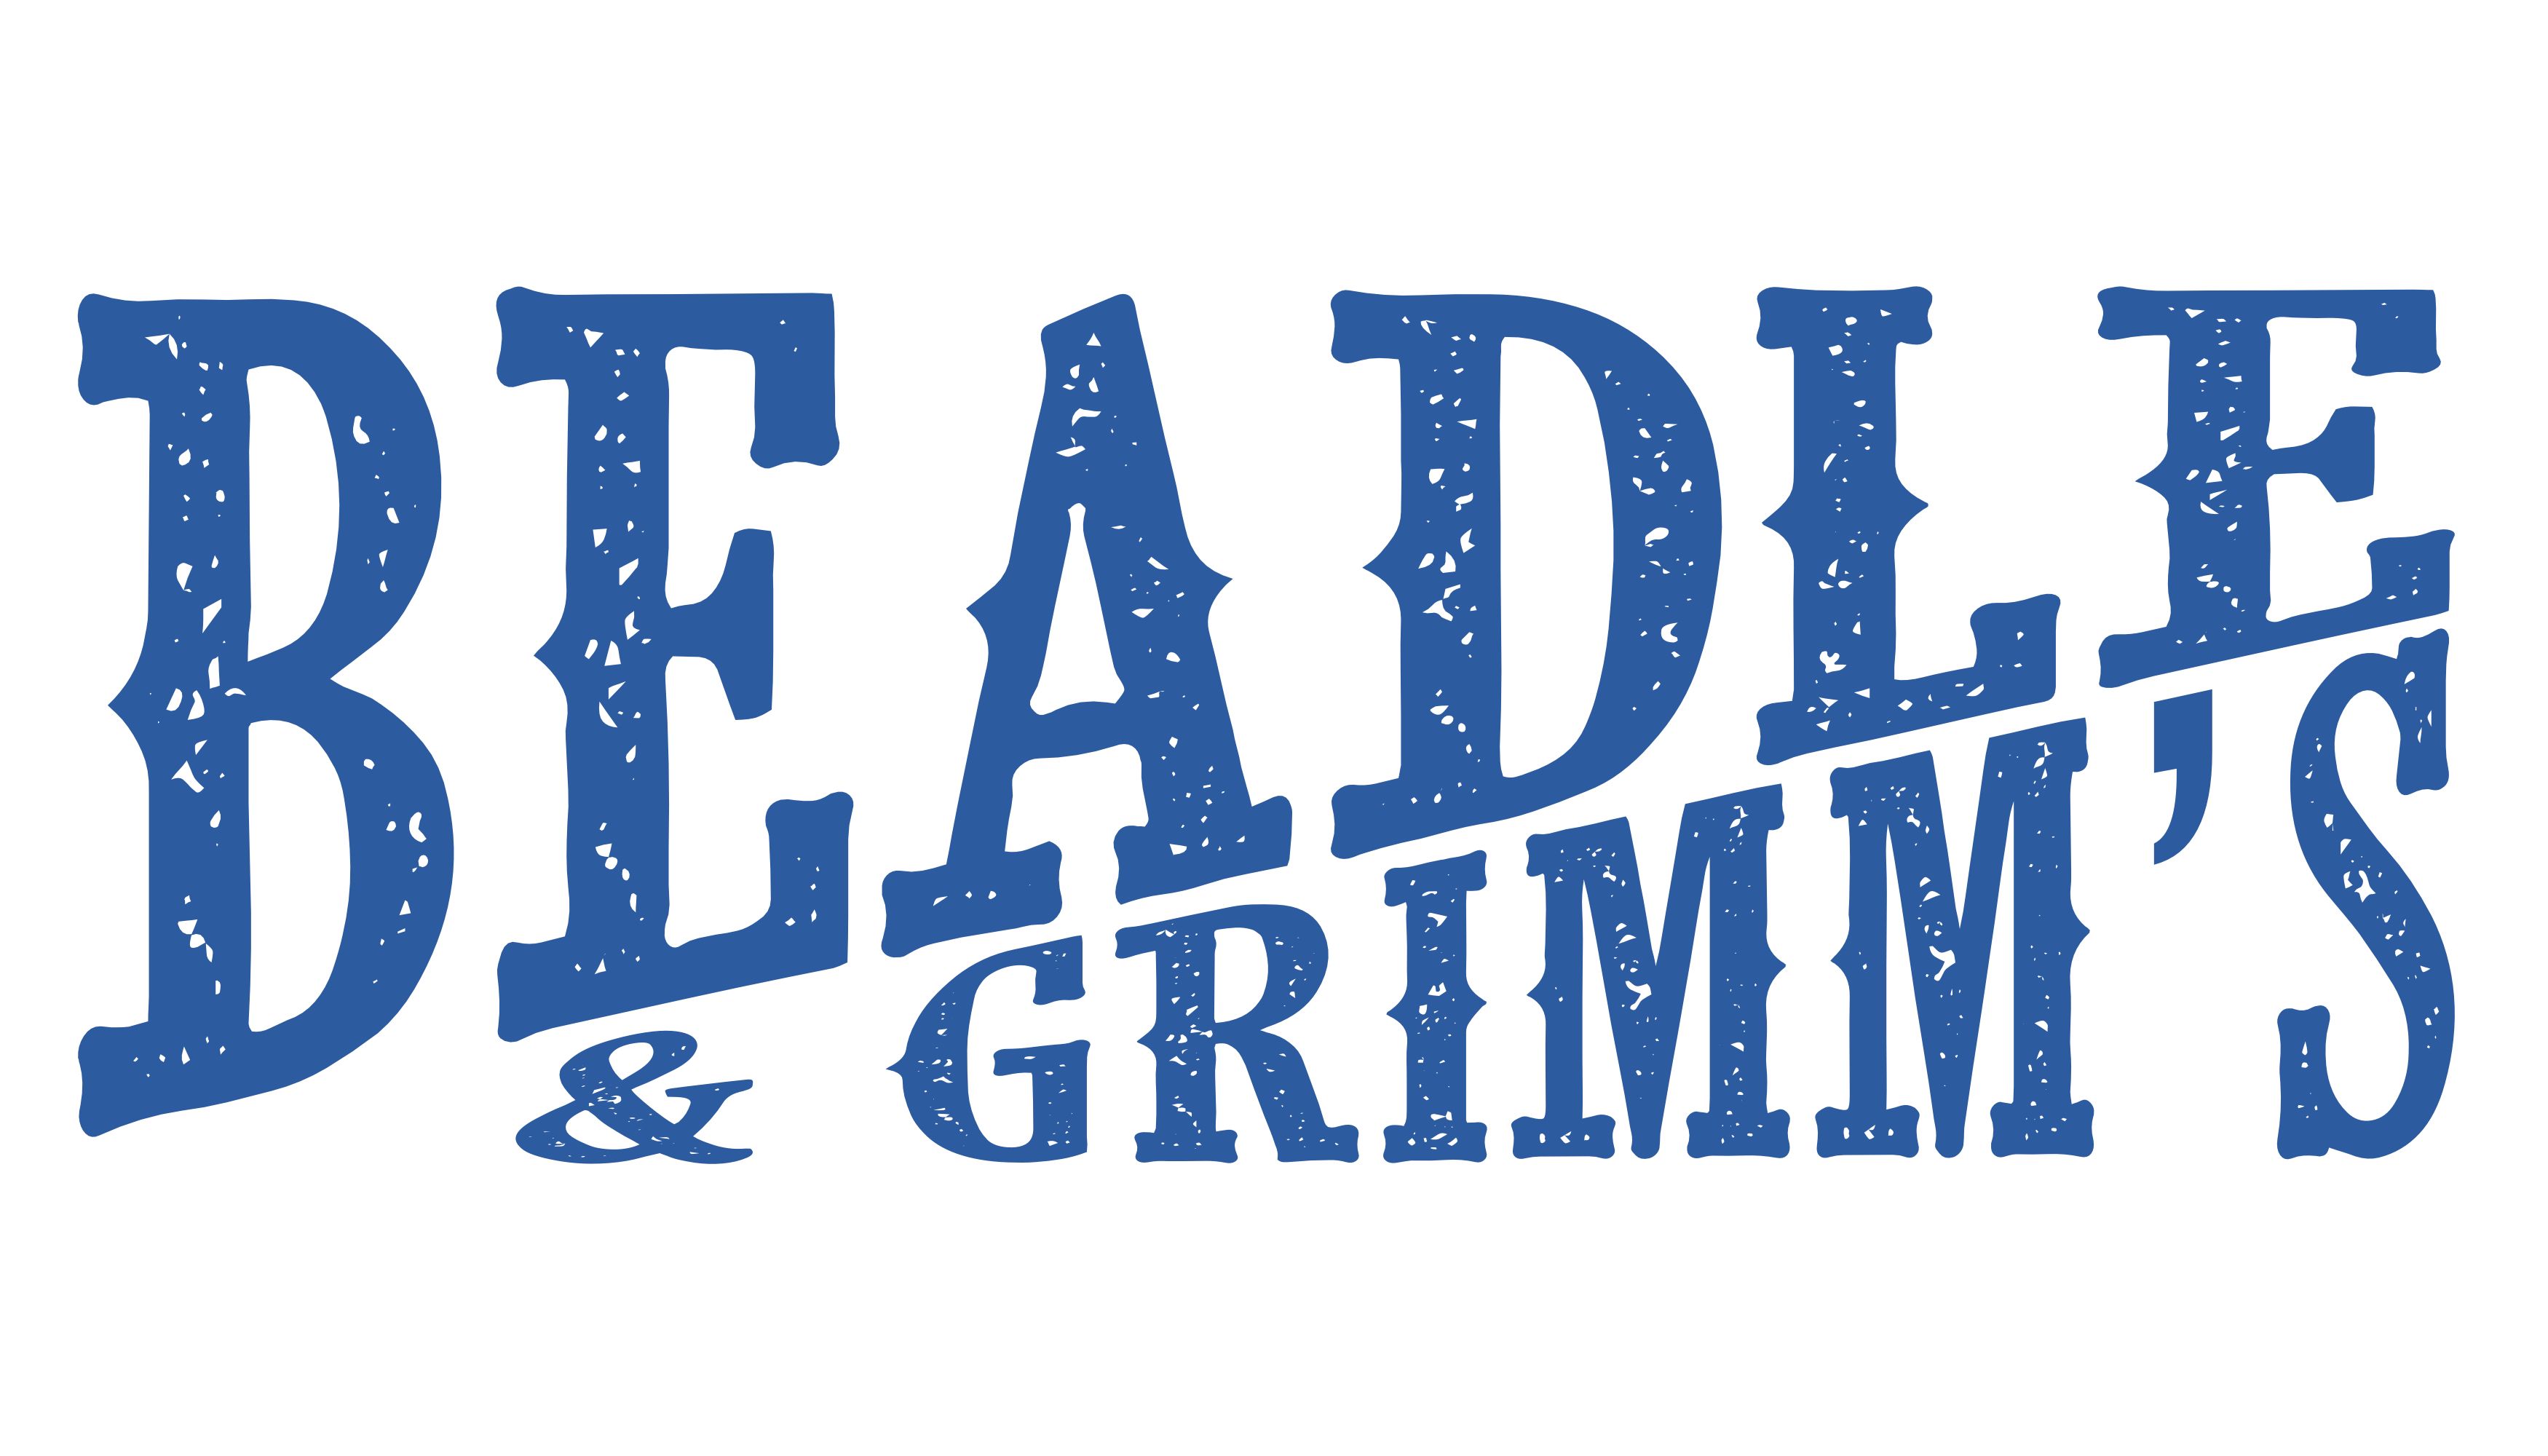 Beadle and Grimm's blue distressed text logo